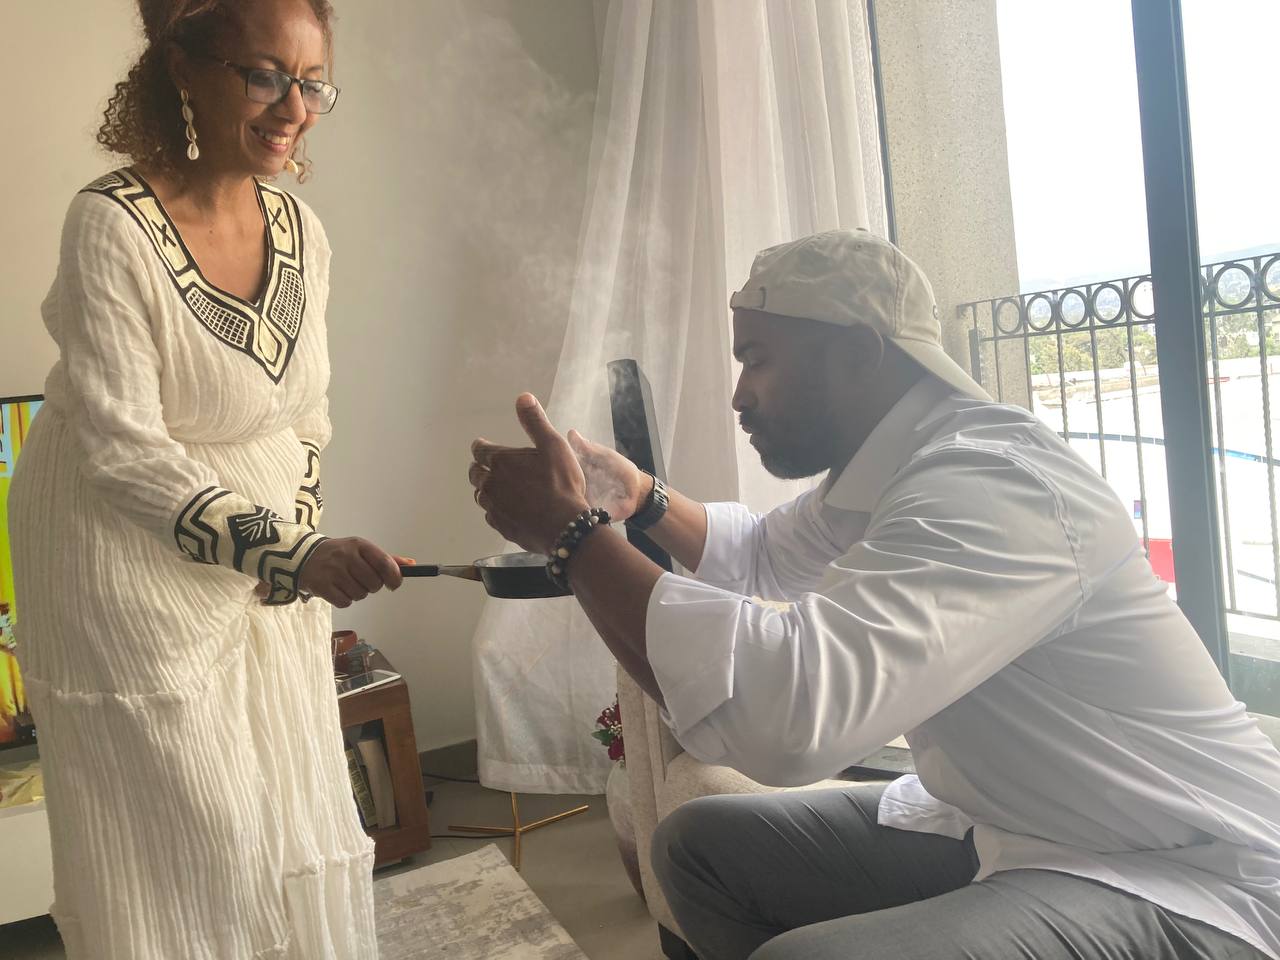 A new bride roasts Ethiopian coffee beans and holds the smoking pan to her new husband, who smells the flavoured smoke